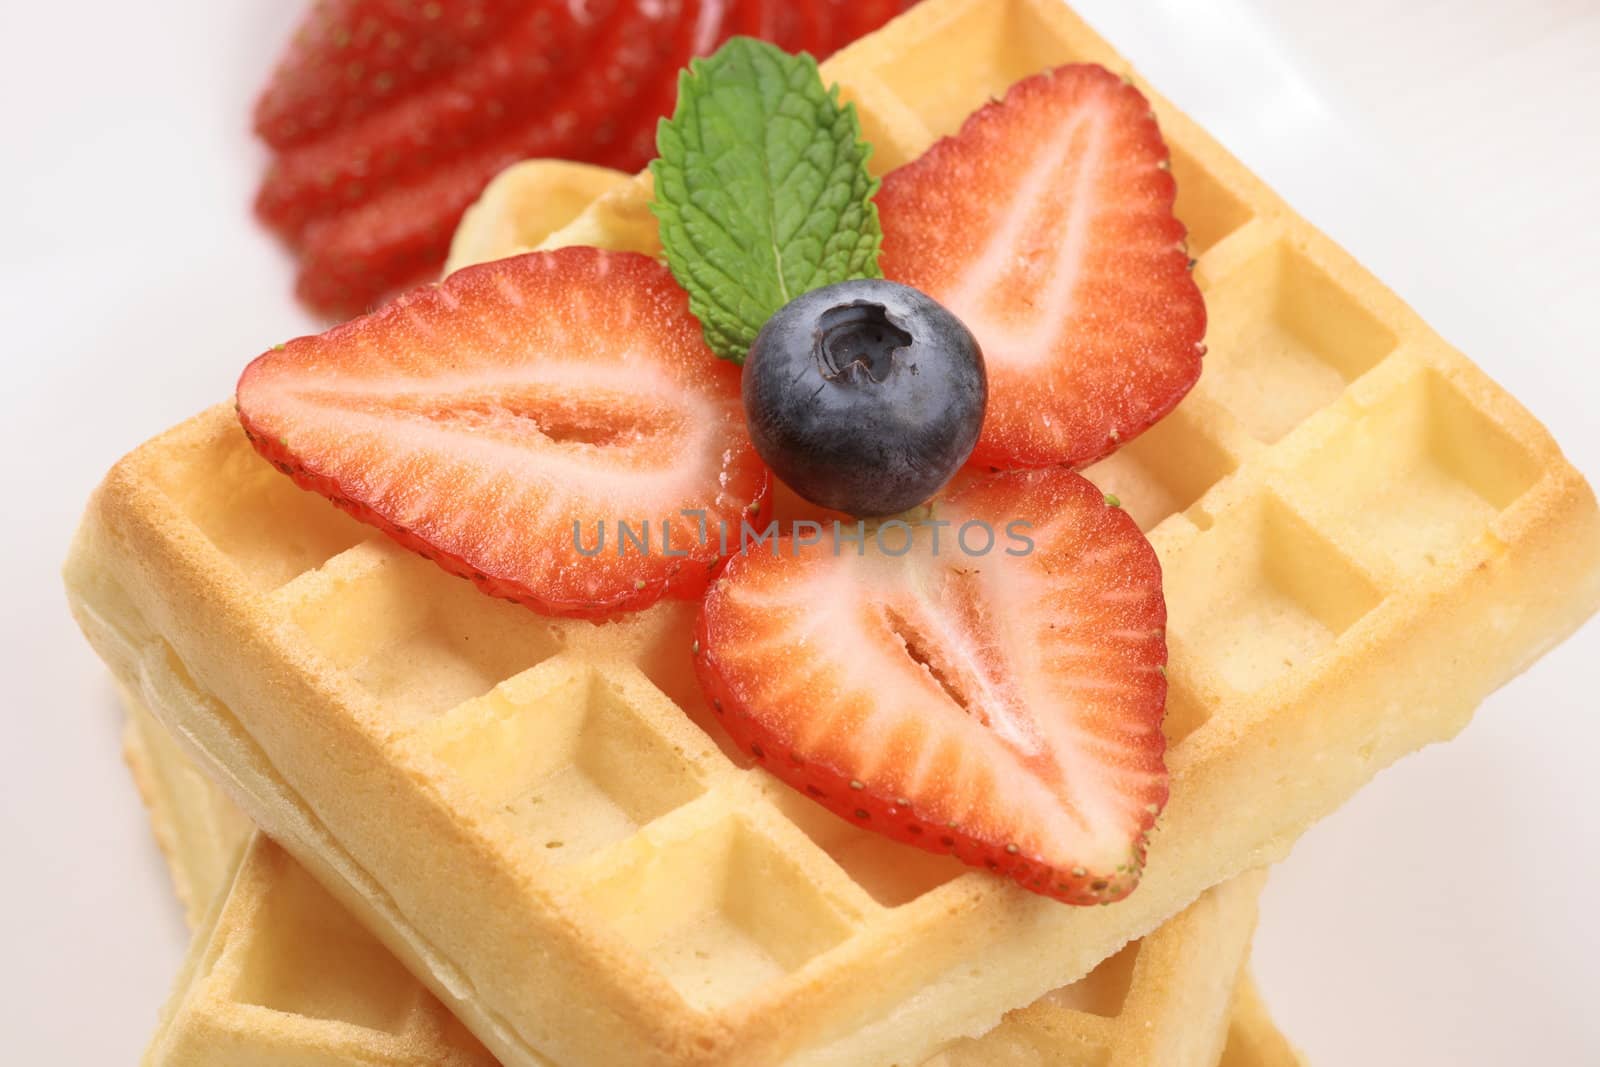 Exquisite belgian waffle garnished with organic strawberry and blueberry